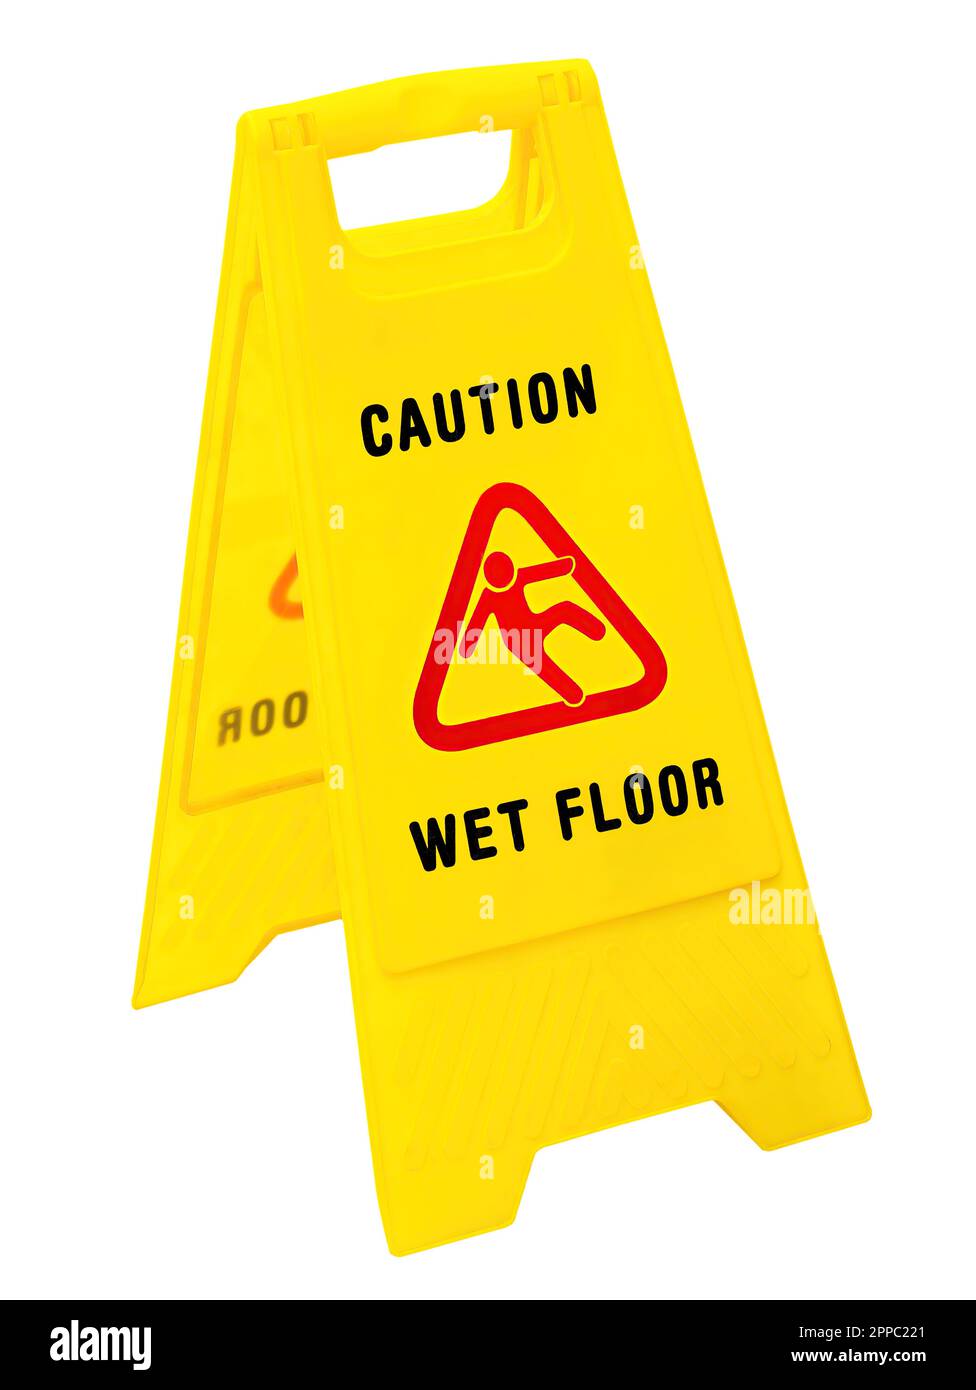 Caution Wet Floor yellow warning sign isolated on white background Stock Photo